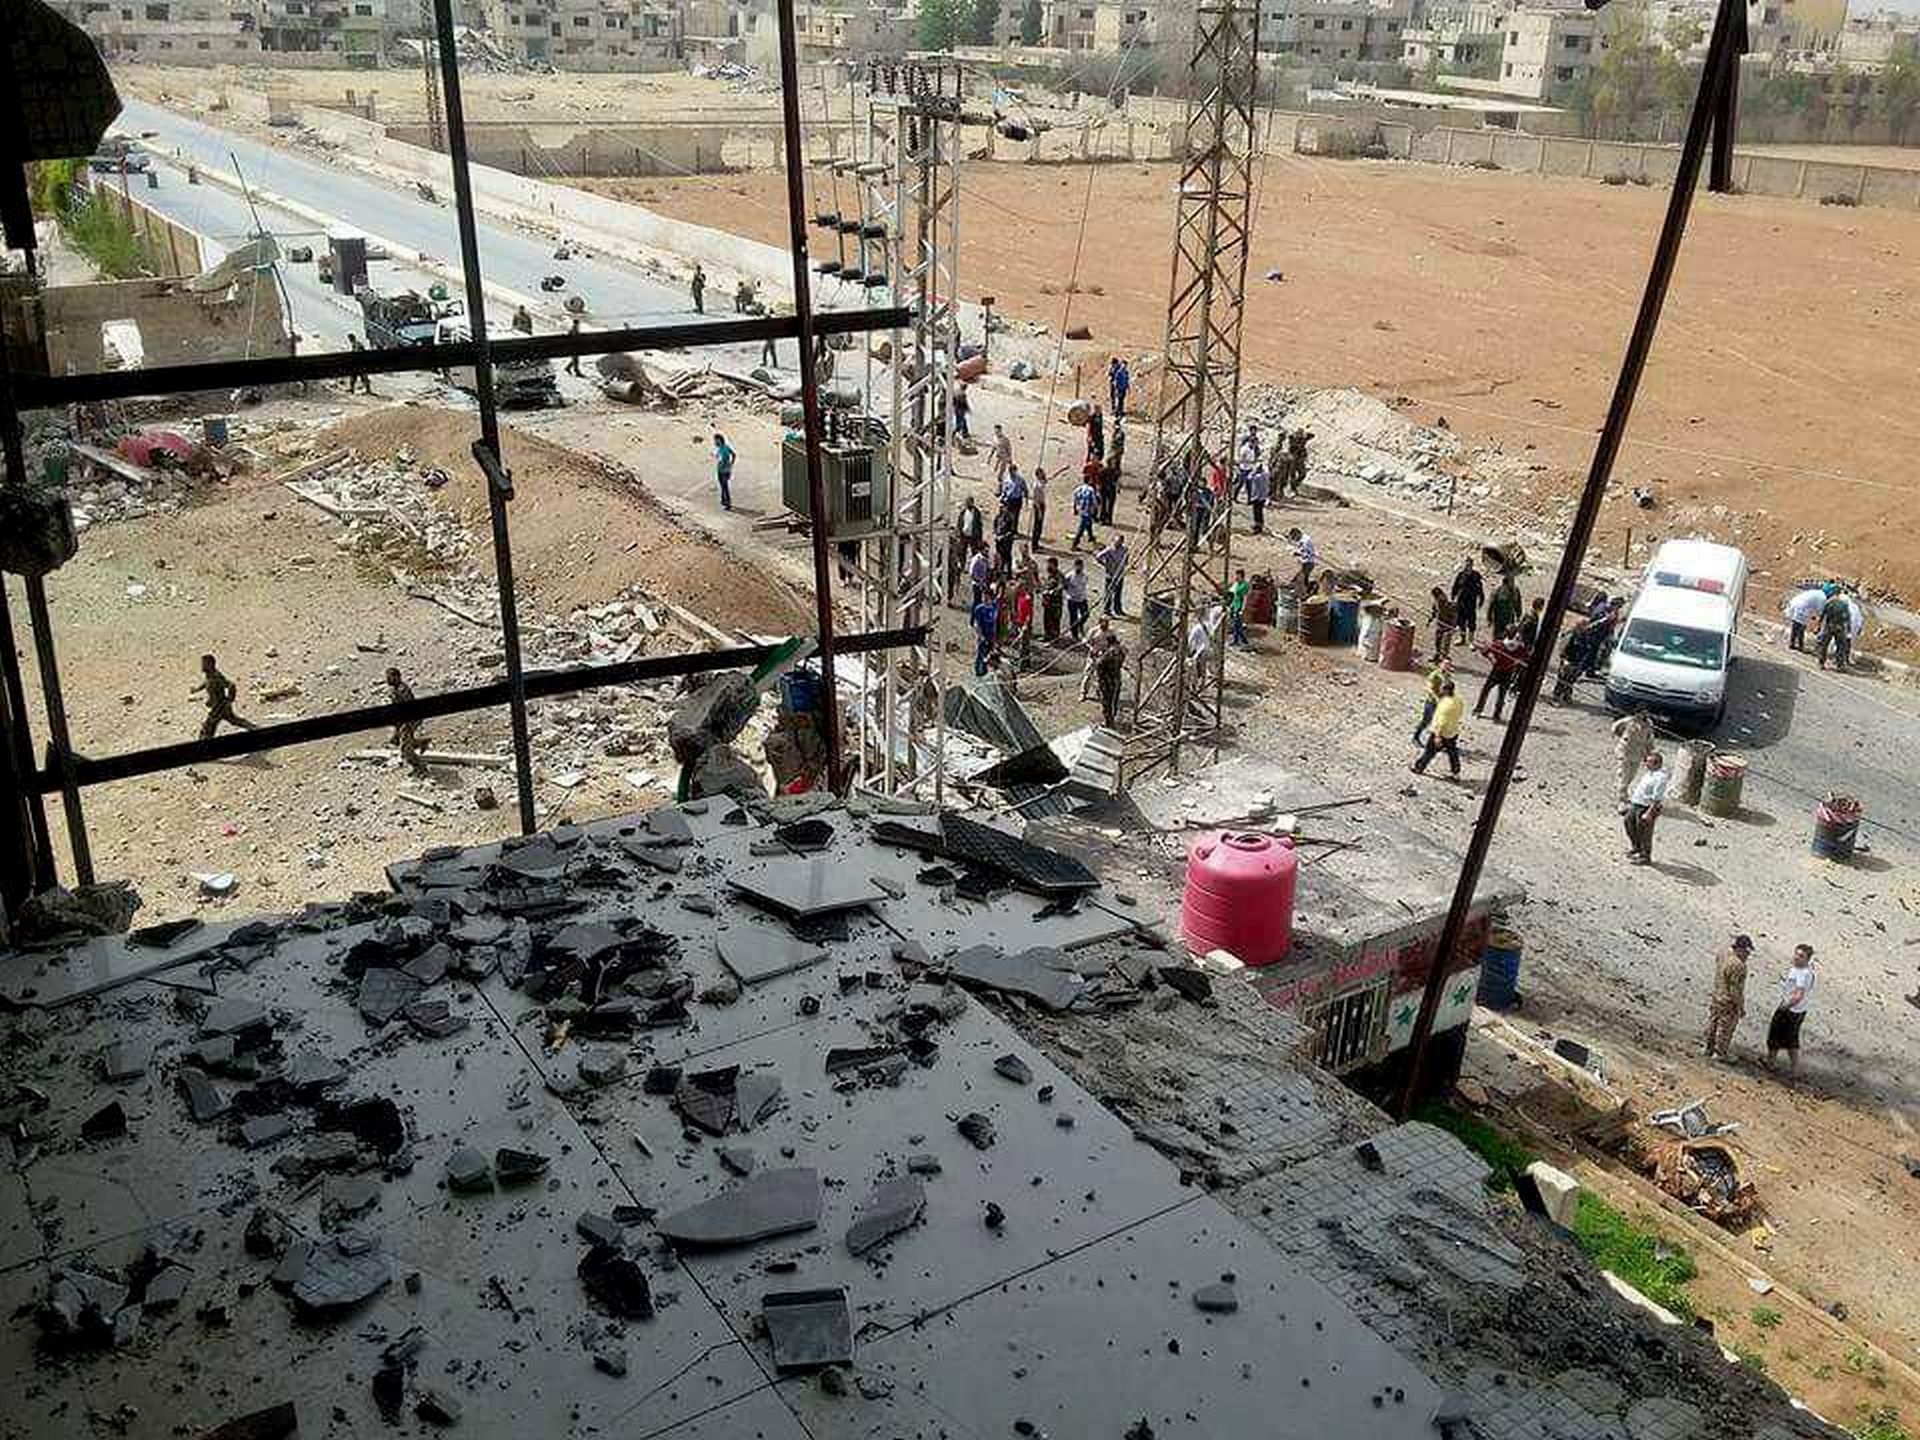 epa05276651 A handout picture made available by Syrian Arab News Agency (SANA) shows Syrian policemen inspecting the site of bombing, at the entrance of al-Diabiyeh town in Damascus countryside , Syria, 25 April 2016. According to SANA, five civilians were killed and 20 others were injured in the car bombing.